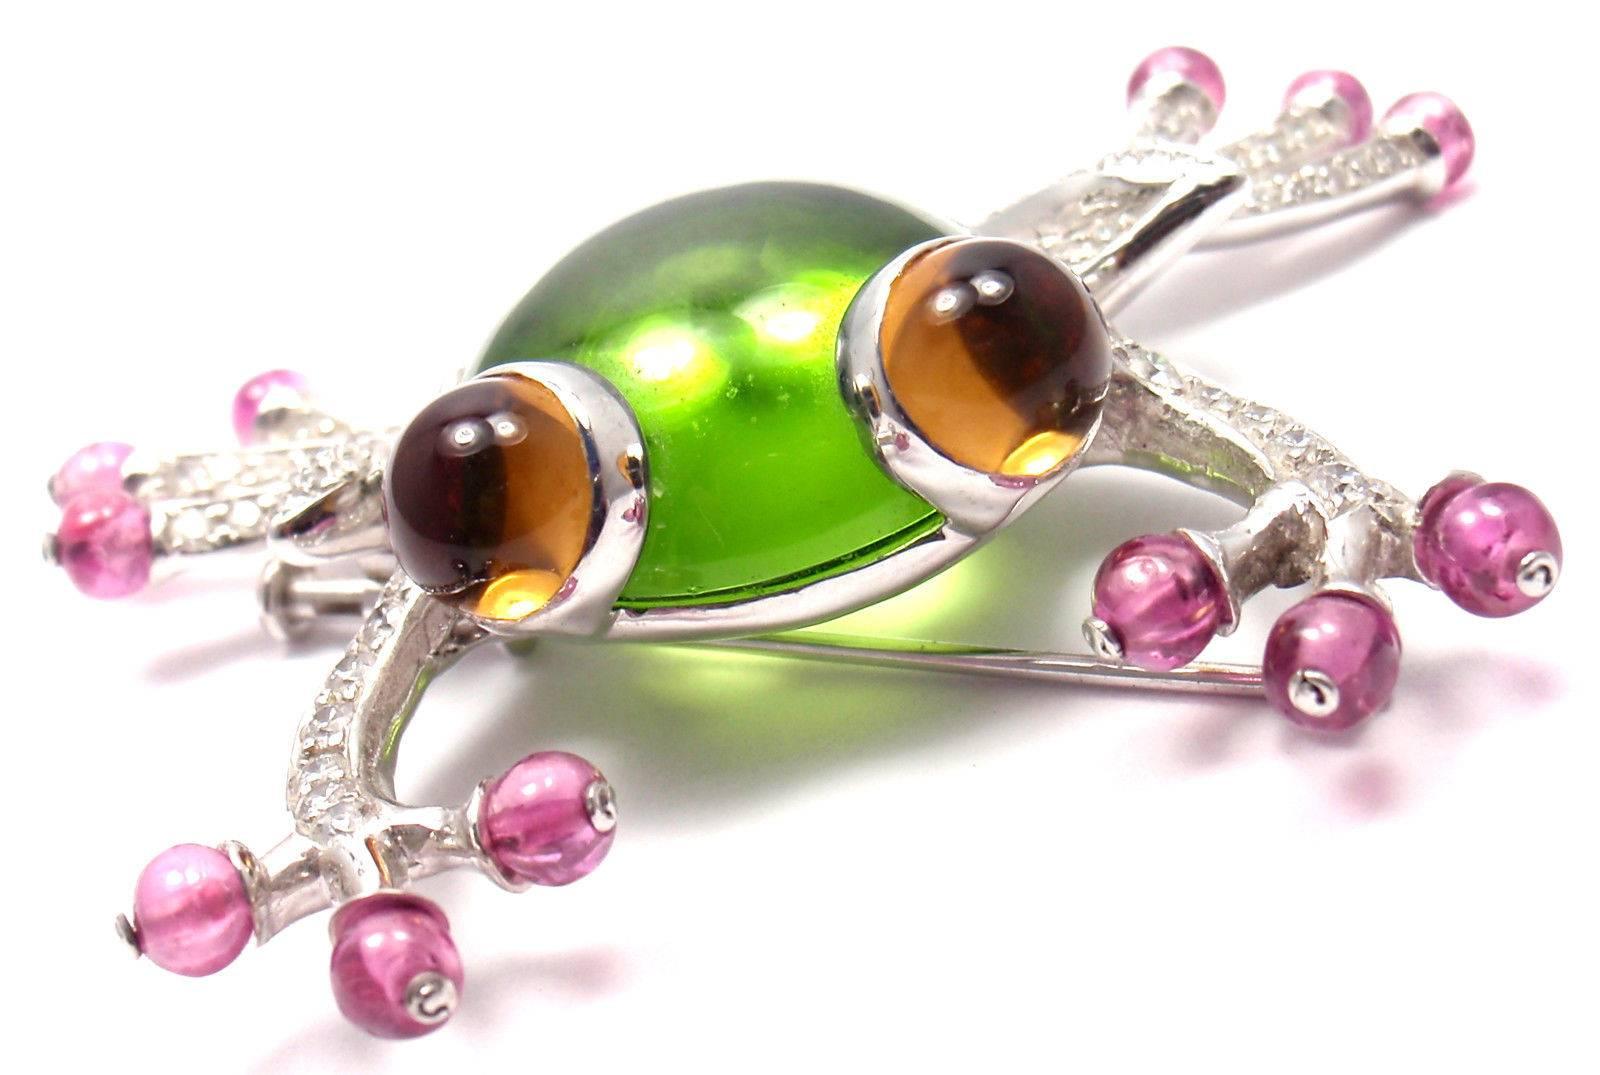 18k White Gold Diamond Peridot Pink Sapphire Citrine  Frog By Bulgari.

With 1 Large Peridot 18mm x 10mm total 29.15ct
12 pink sapphire stones 3mm each
2 citrines 7mm each
60 round brilliant cut diamonds VS1 clarity, E color total weight